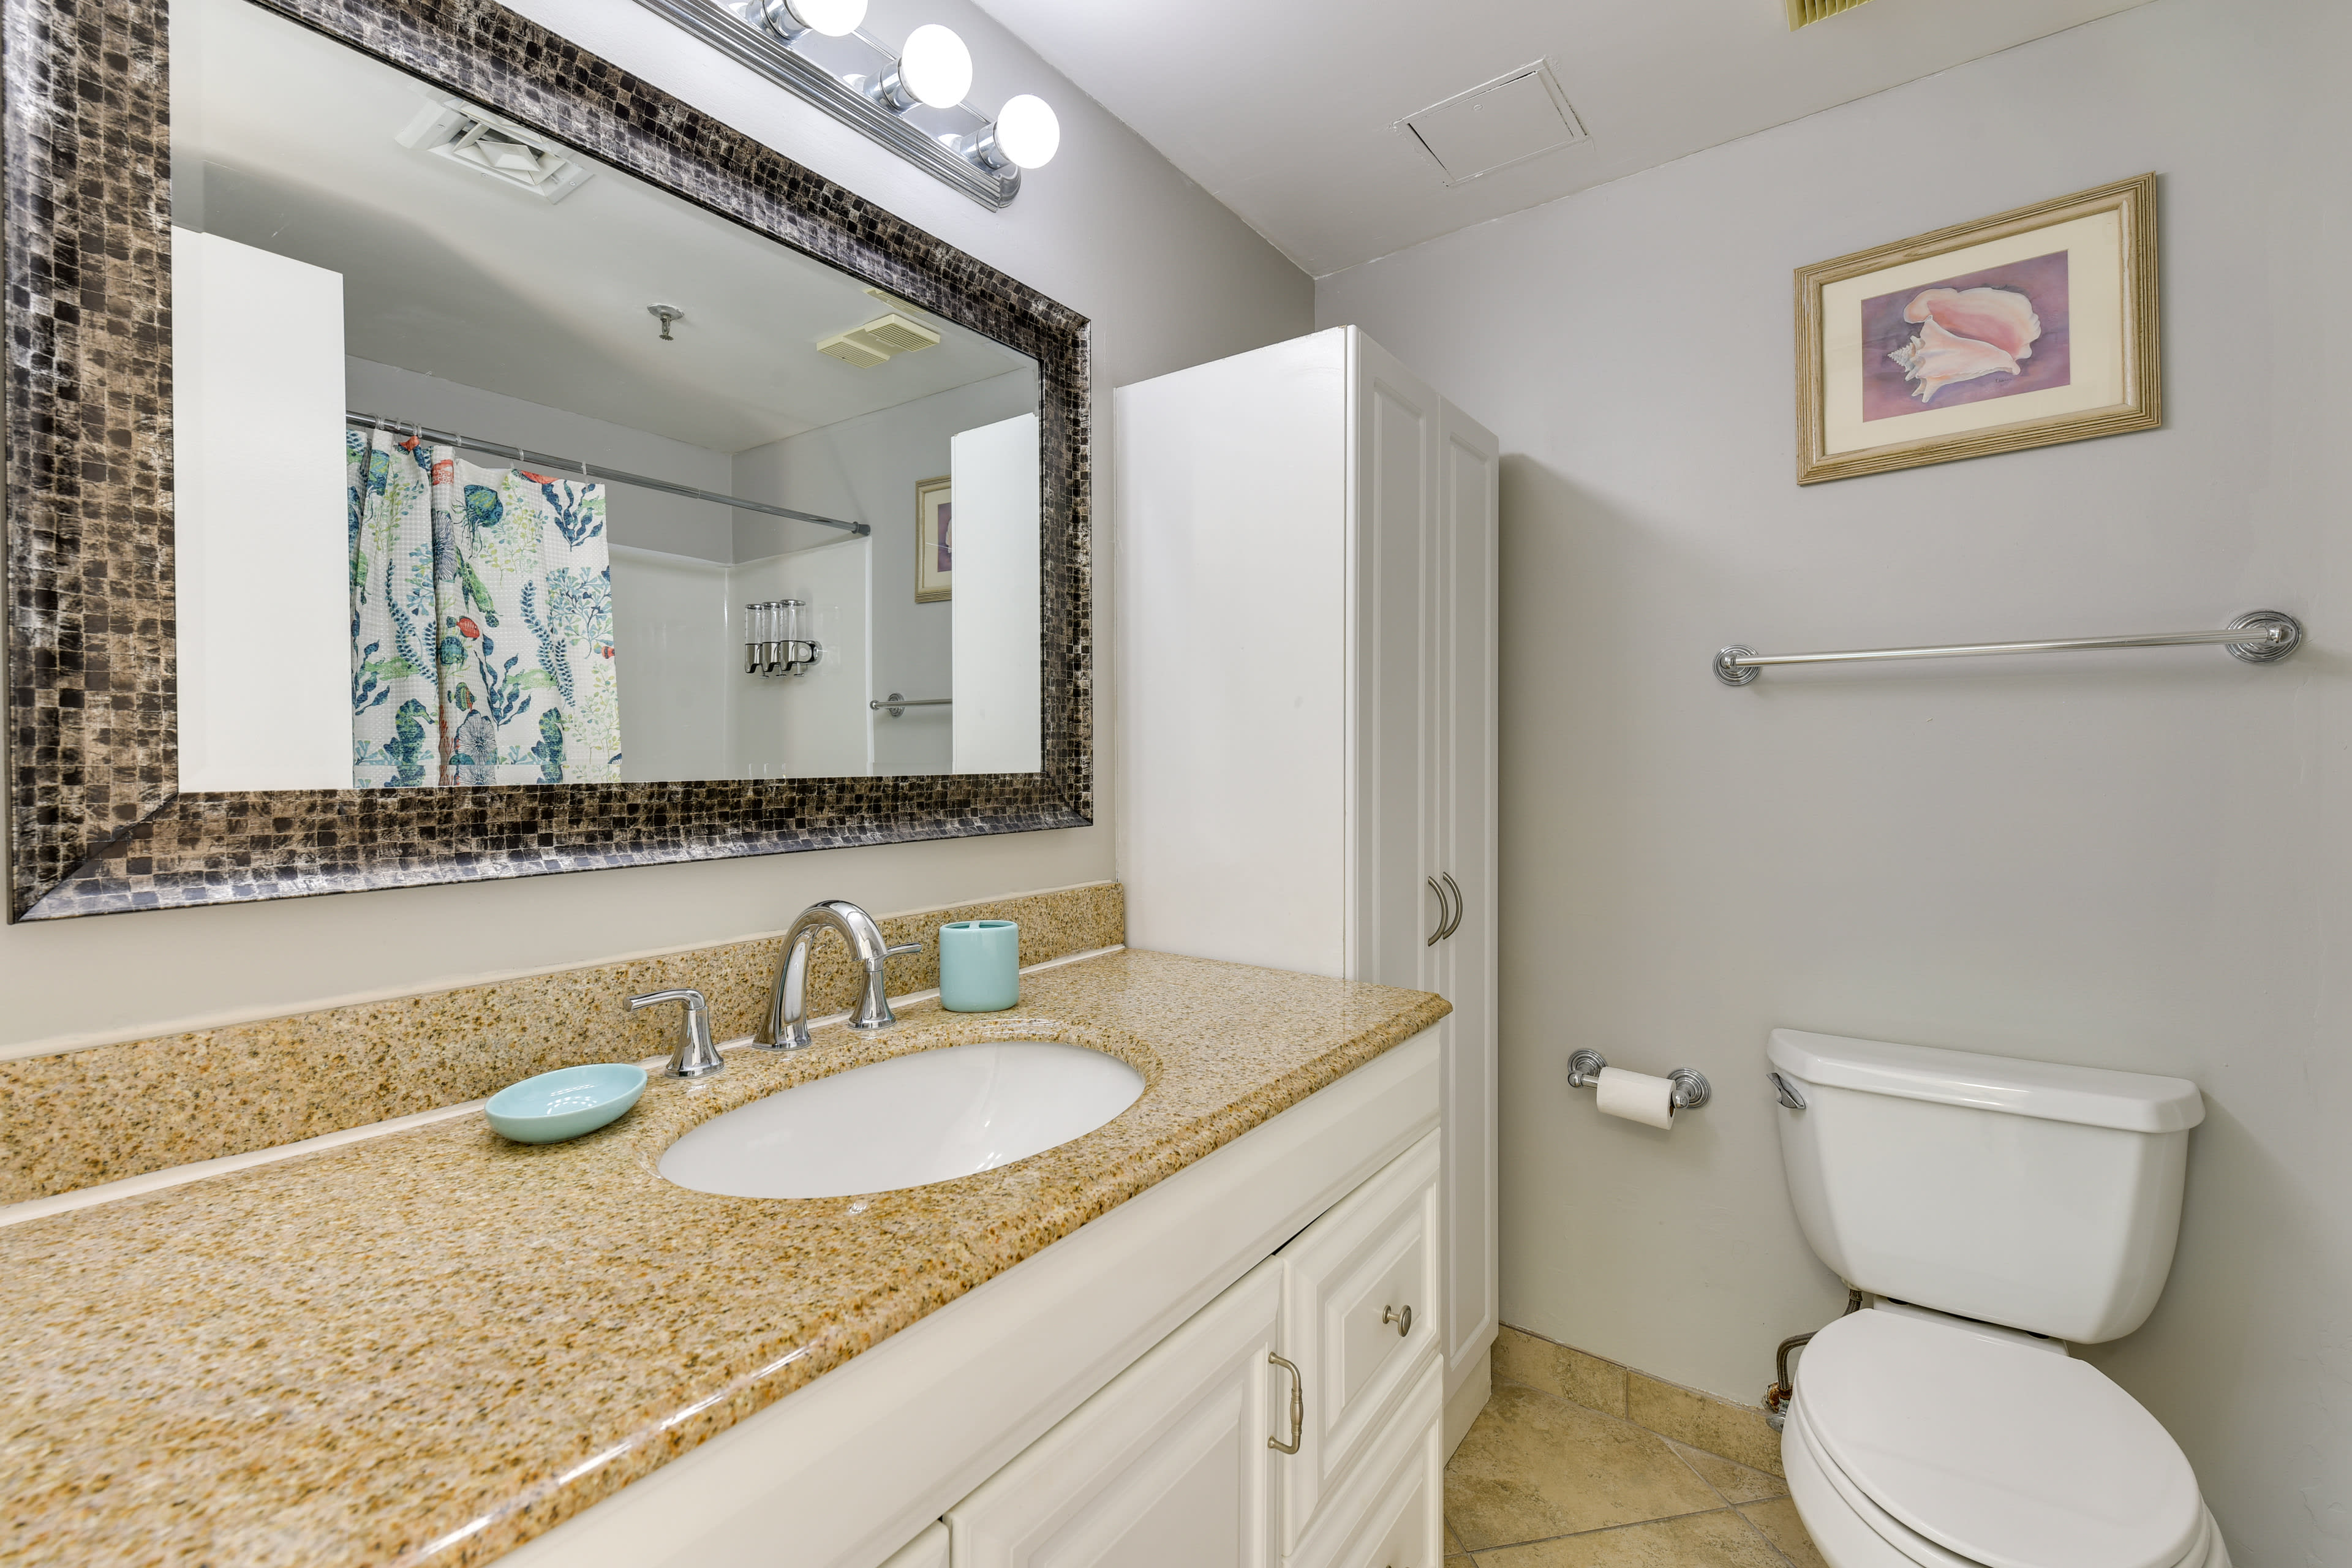 Full Bathroom | Shower/Tub Combo | Complimentary Toiletries | Towels Provided